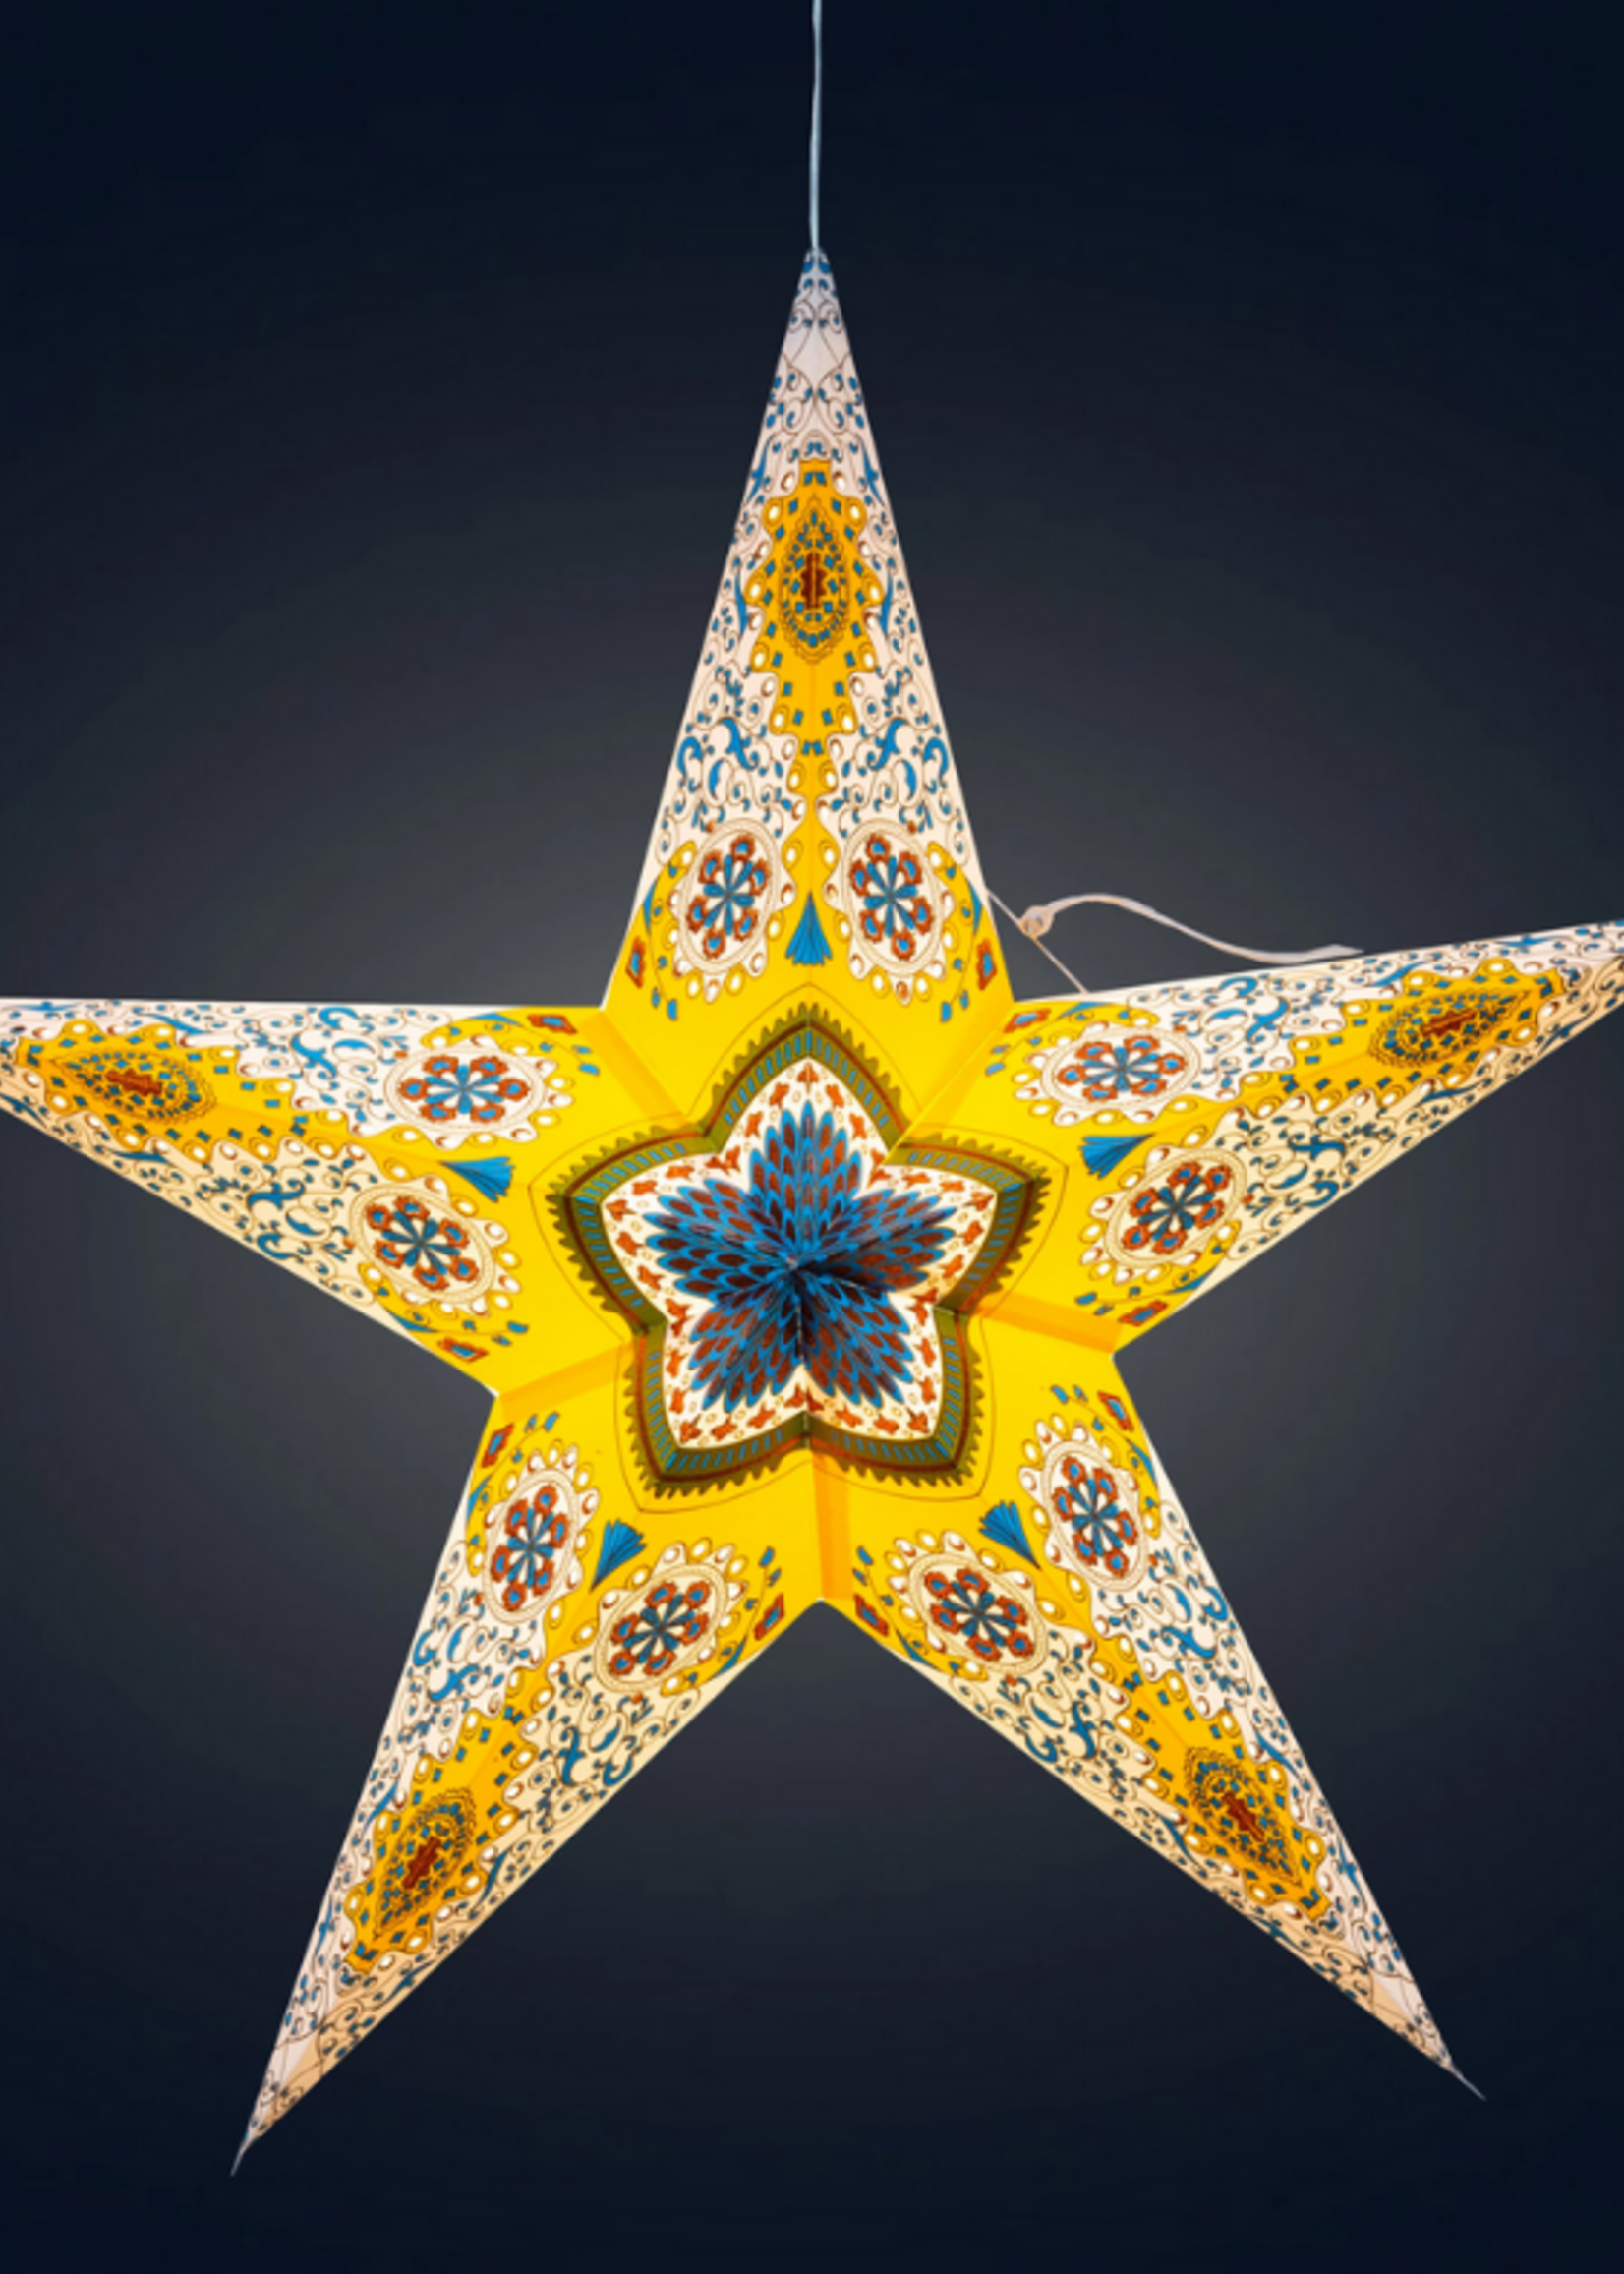 PROVENCE 5-Pointed Star Yellow Paper Star Lantern Light